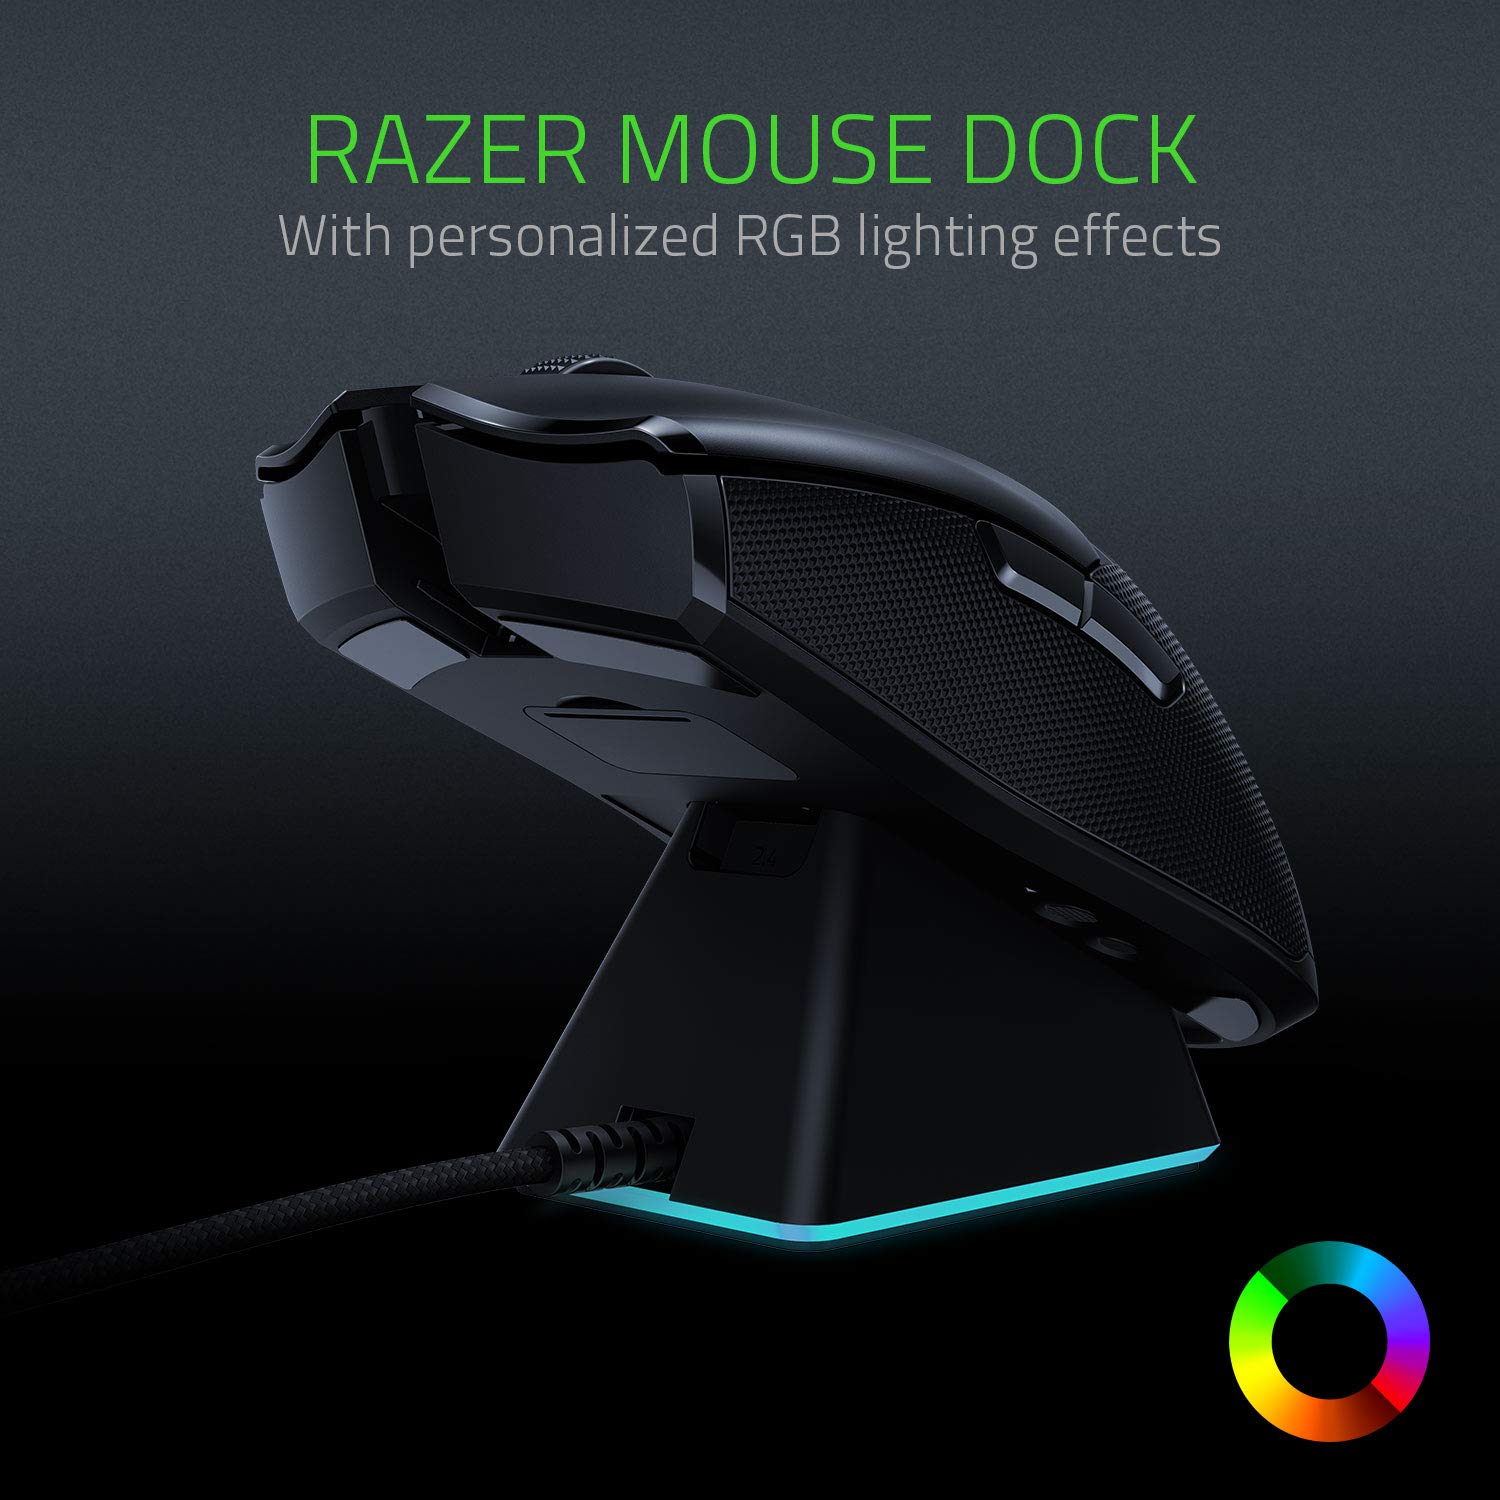 Razer Viper Ultimate Lightweight Wireless Gaming Mouse & RGB Charging Dock: Fastest Gaming Switches - 20K DPI Optical Sensor - Chroma Lighting - 8 Programmable Buttons - 70 Hr Battery - Classic Black - image 5 of 7